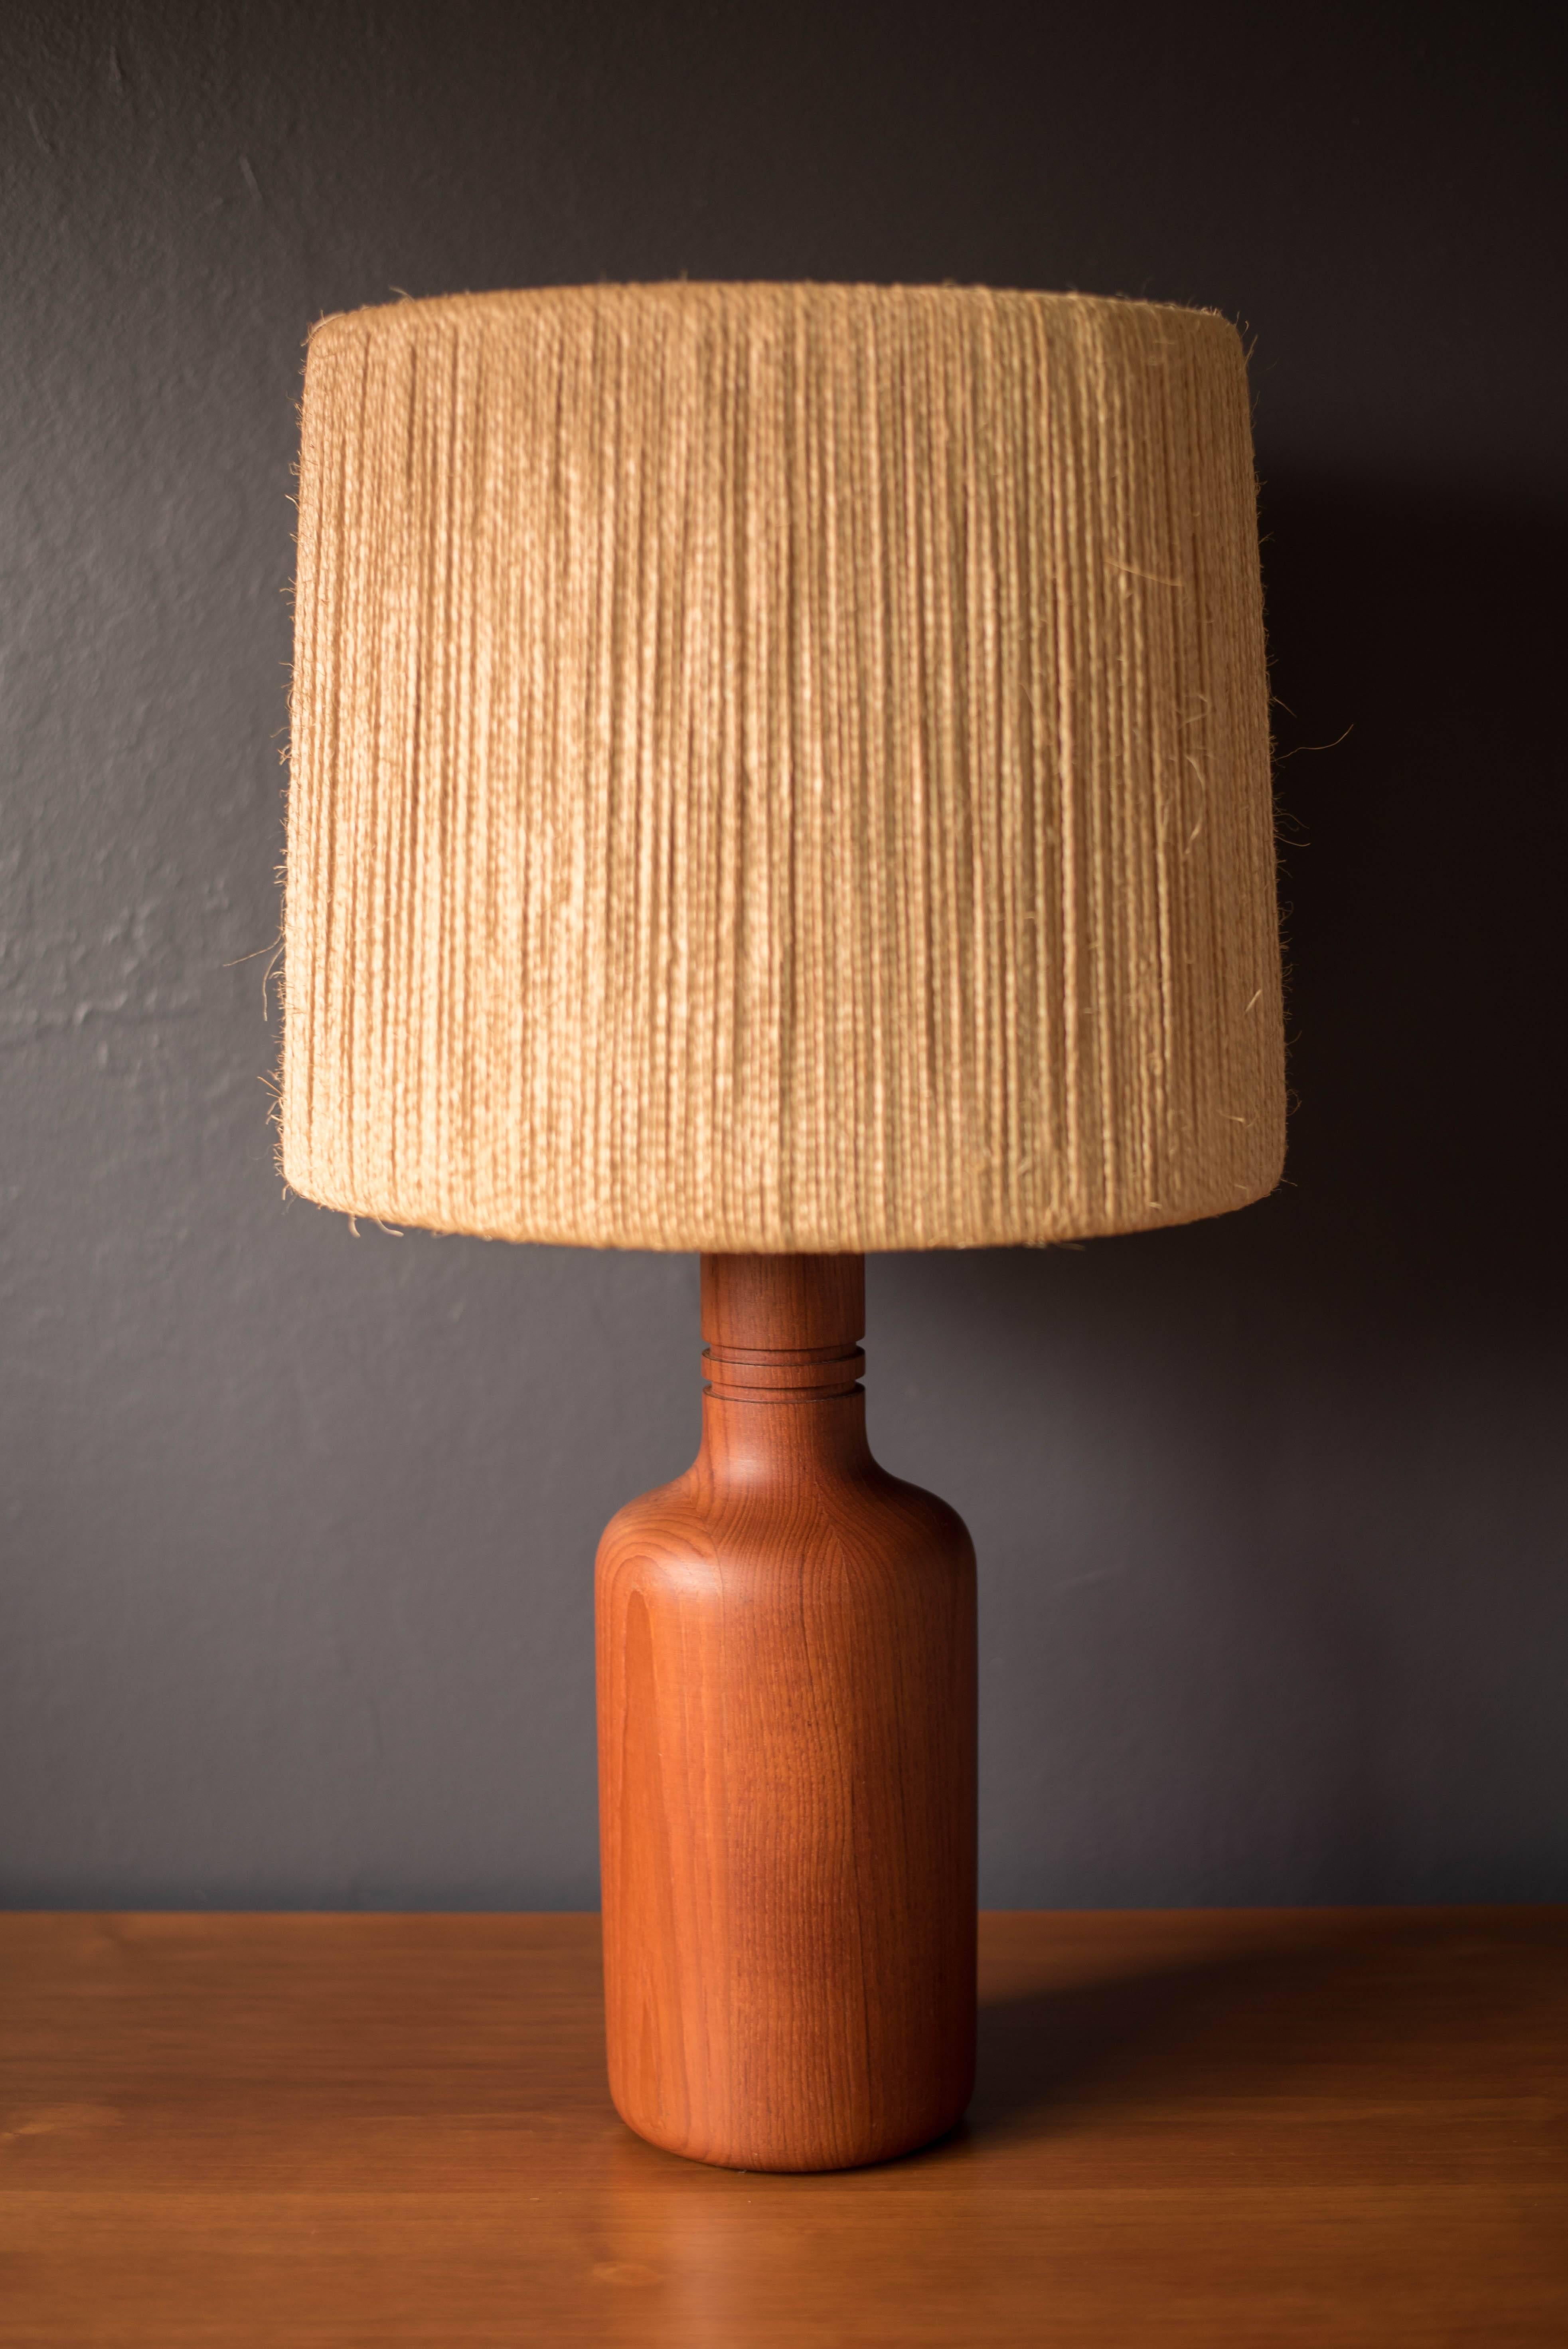 Mid-Century lamp designed by Fog & Mørup in solid teak. This piece includes the original jute string shade and cover.
 